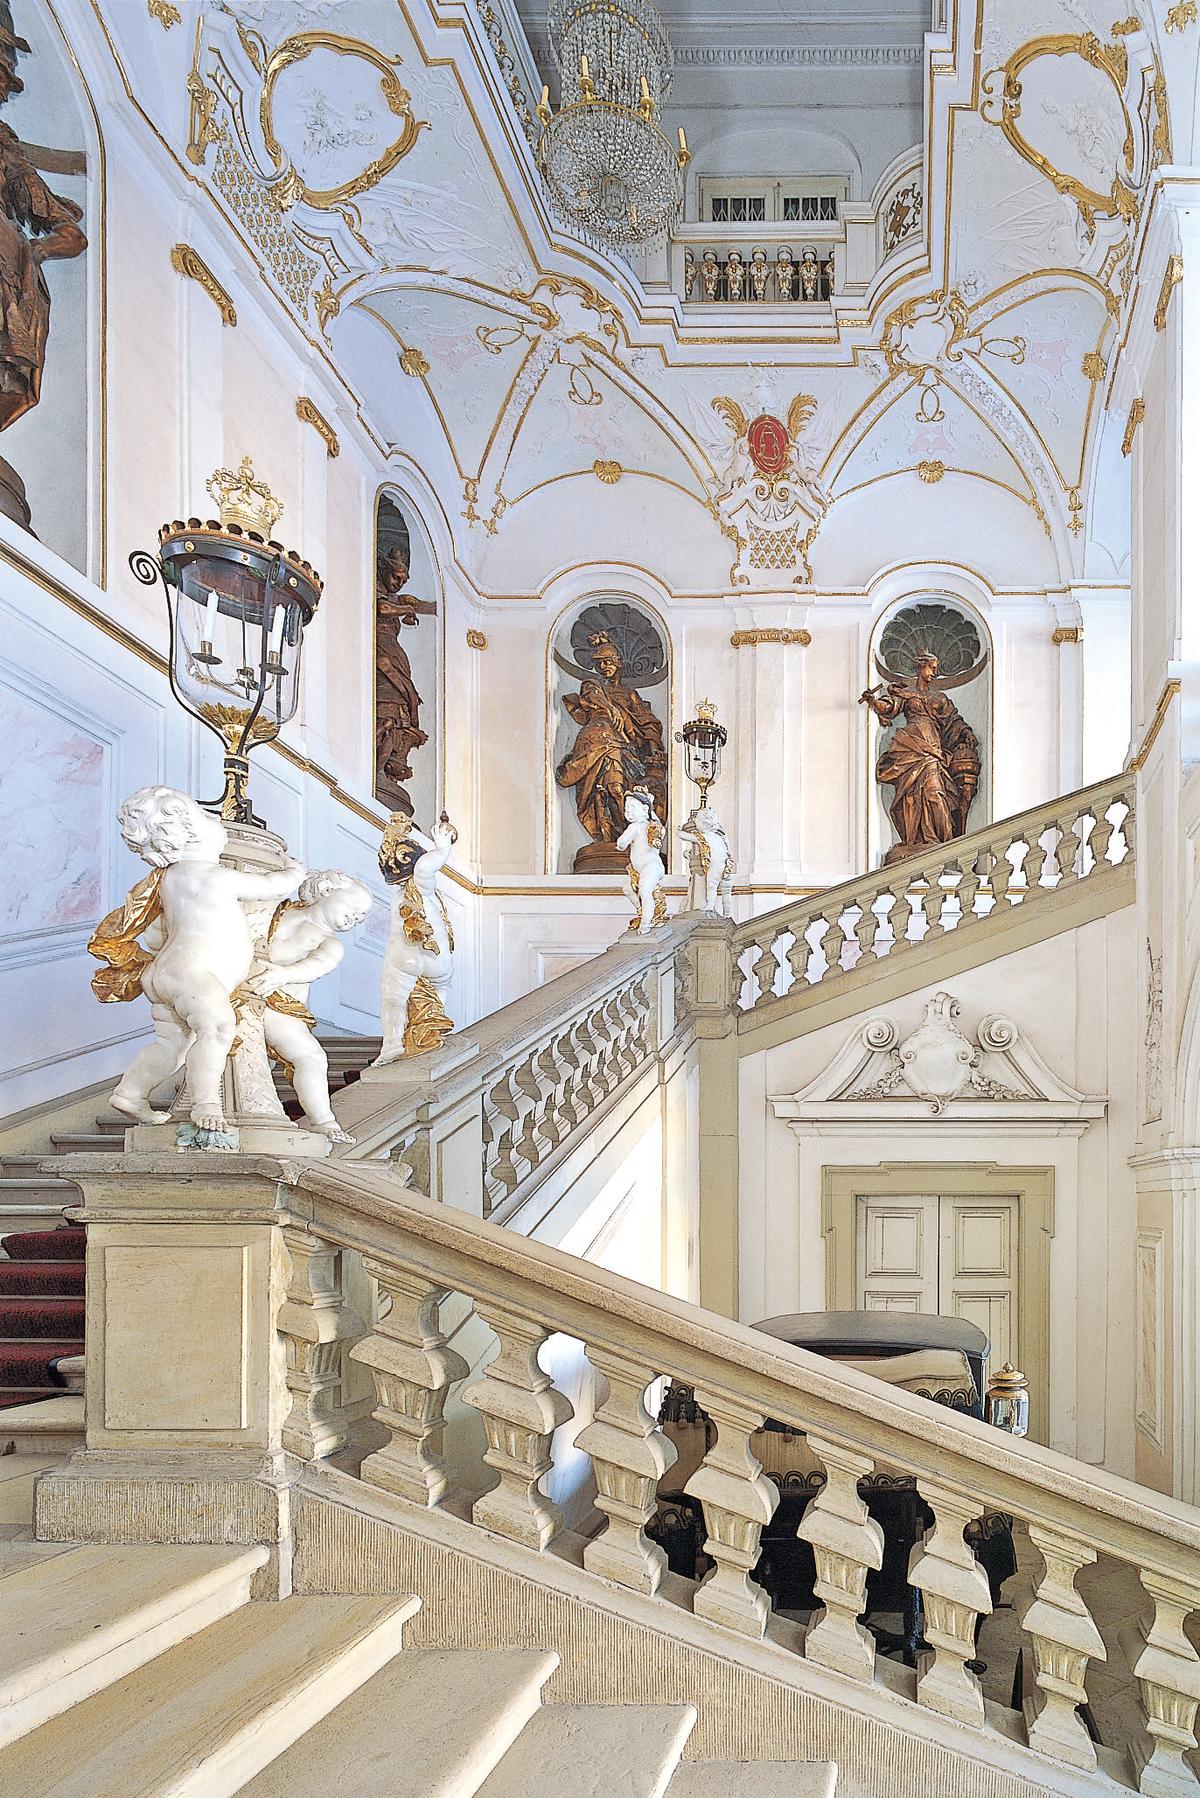 The king's staircase in the New Corps de Logis. (Steffen Hauswirth/State Palaces and Gardens of Baden-Wuerttemberg)